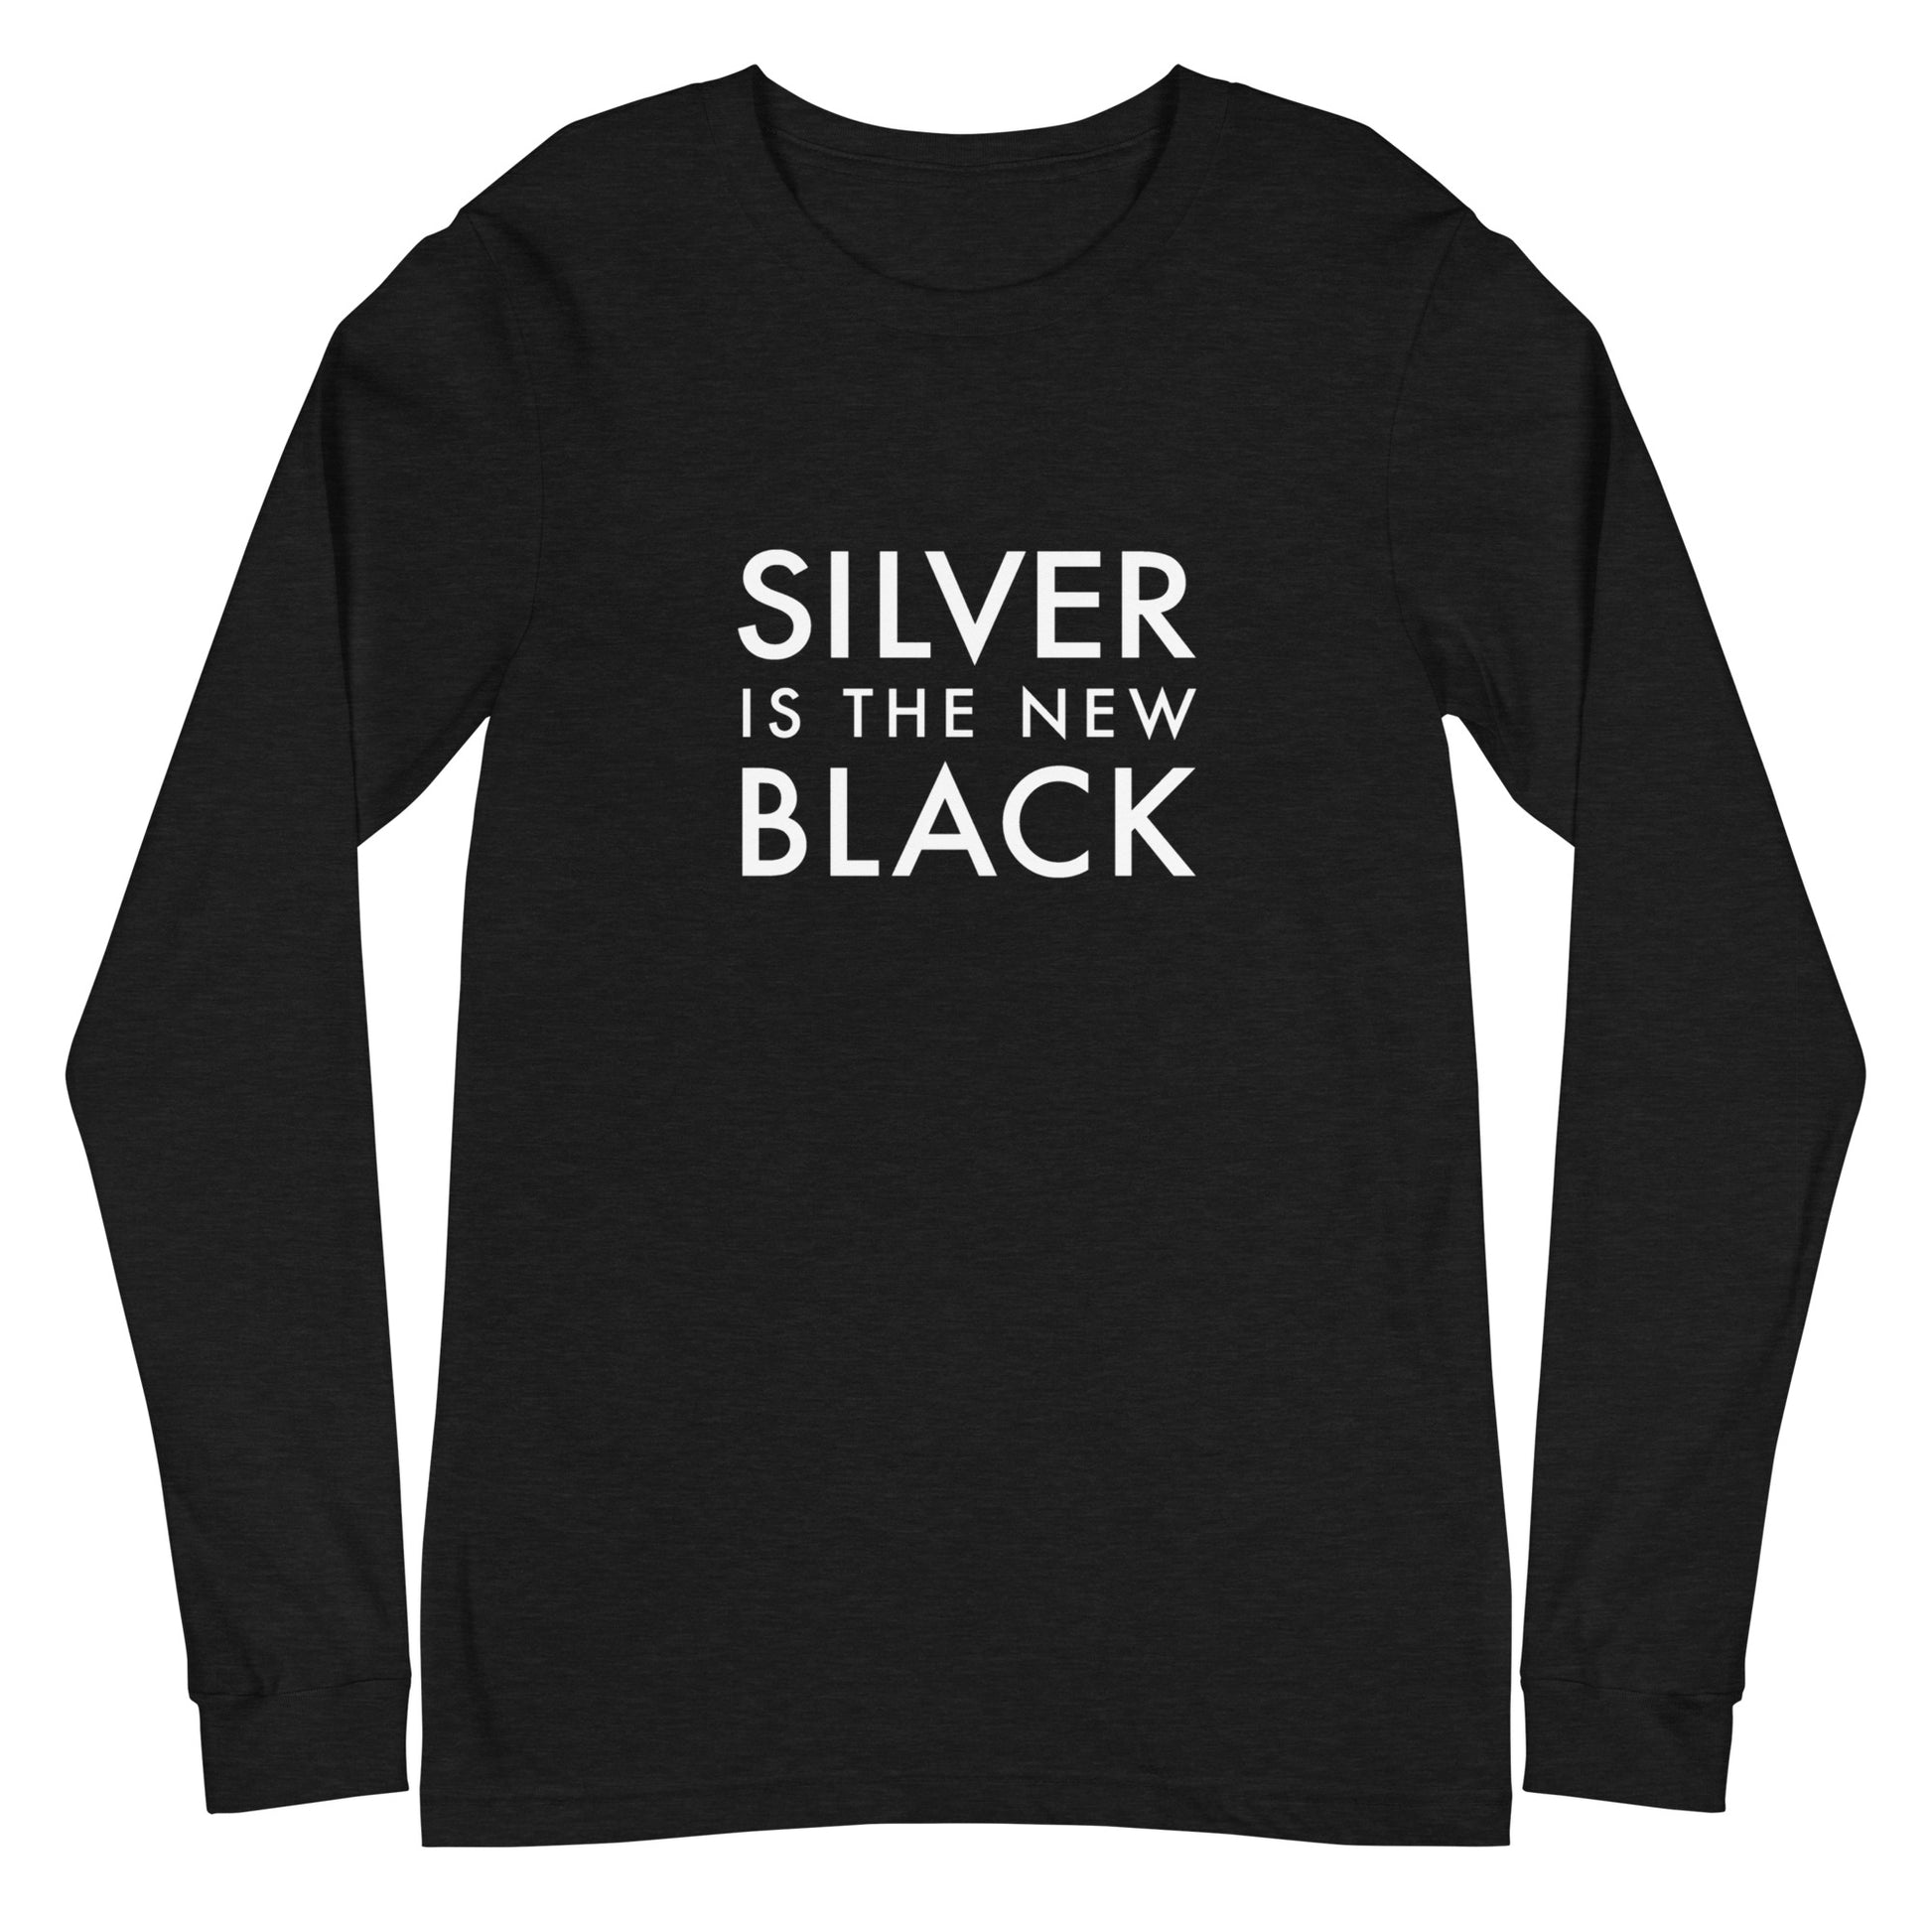 Silver is the New Black Long Sleeve Shirt | Art in Aging